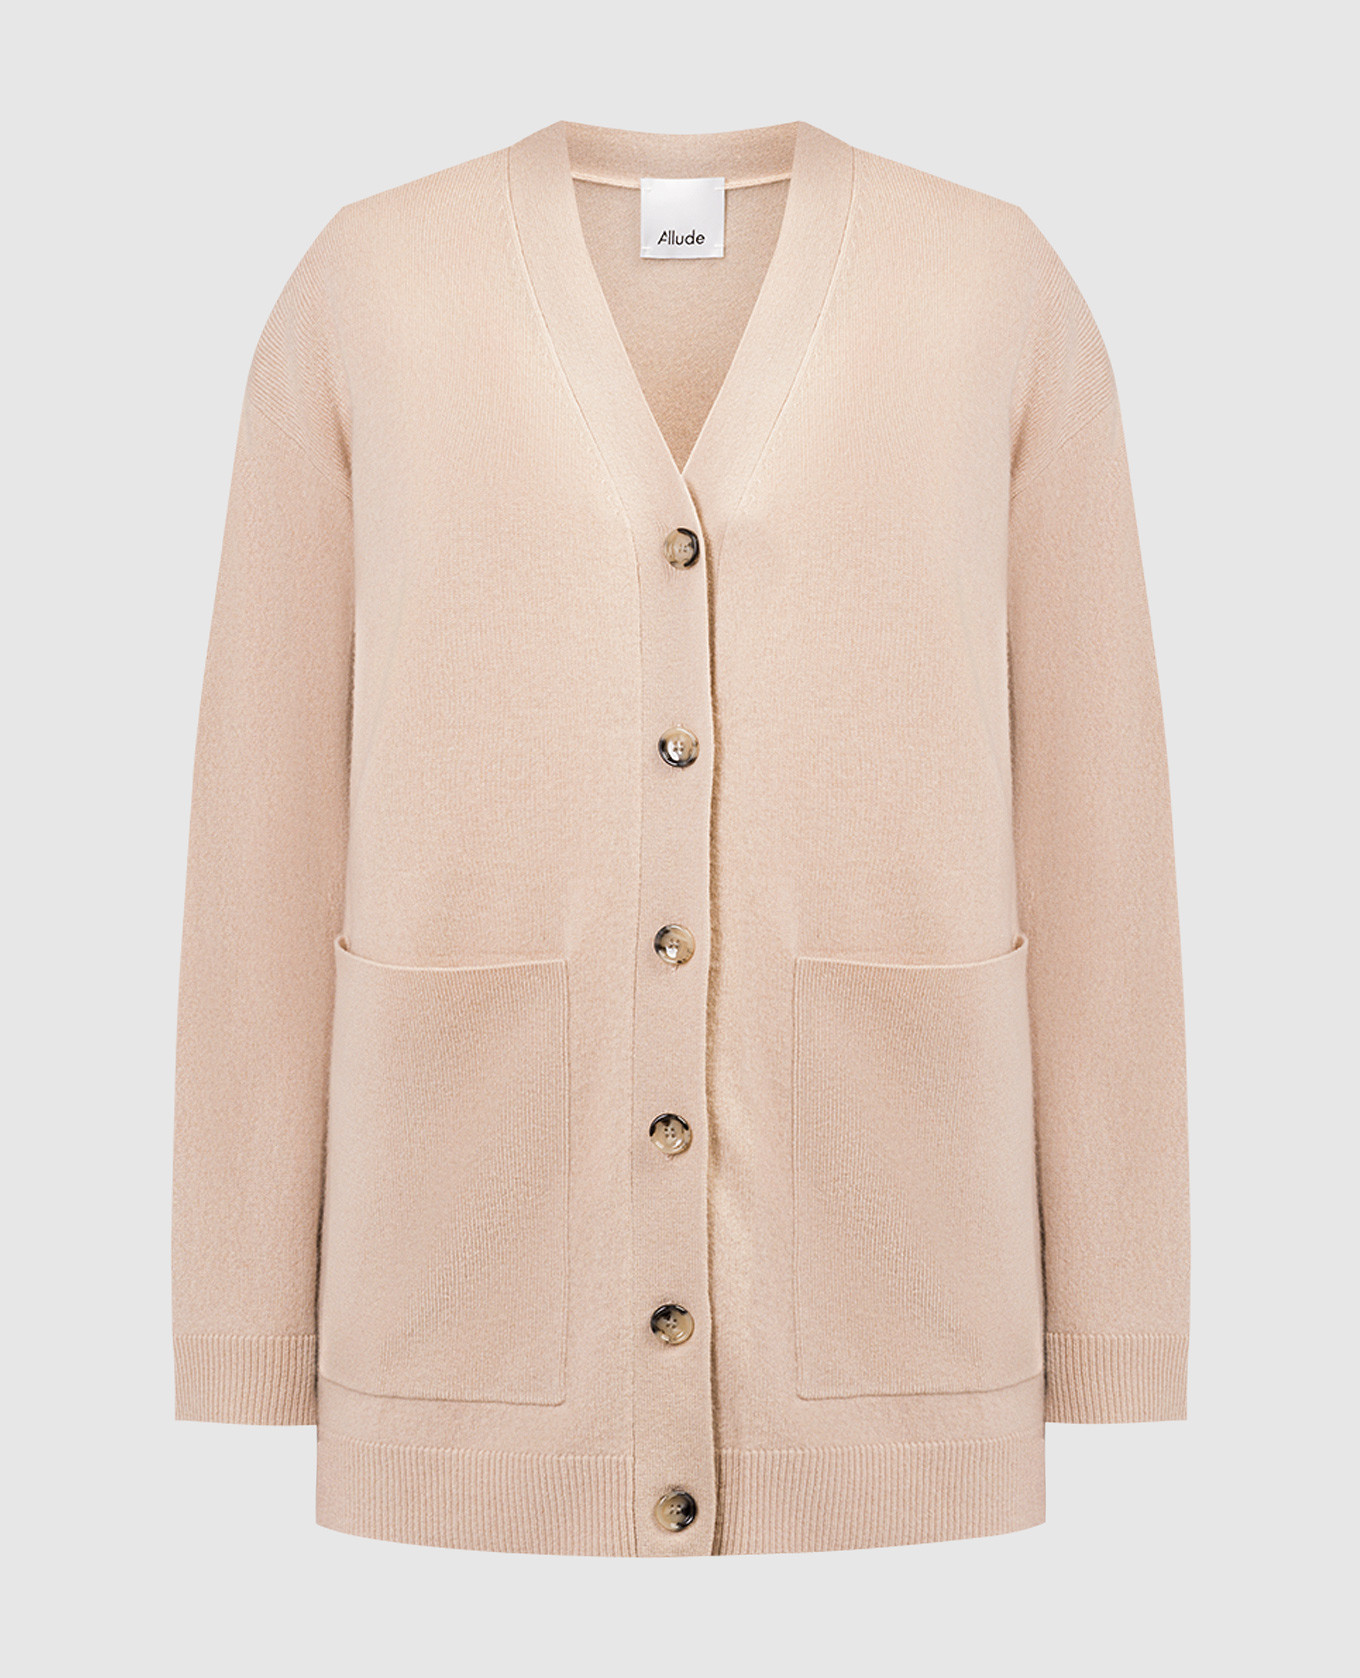 Beige wool and cashmere cardigan